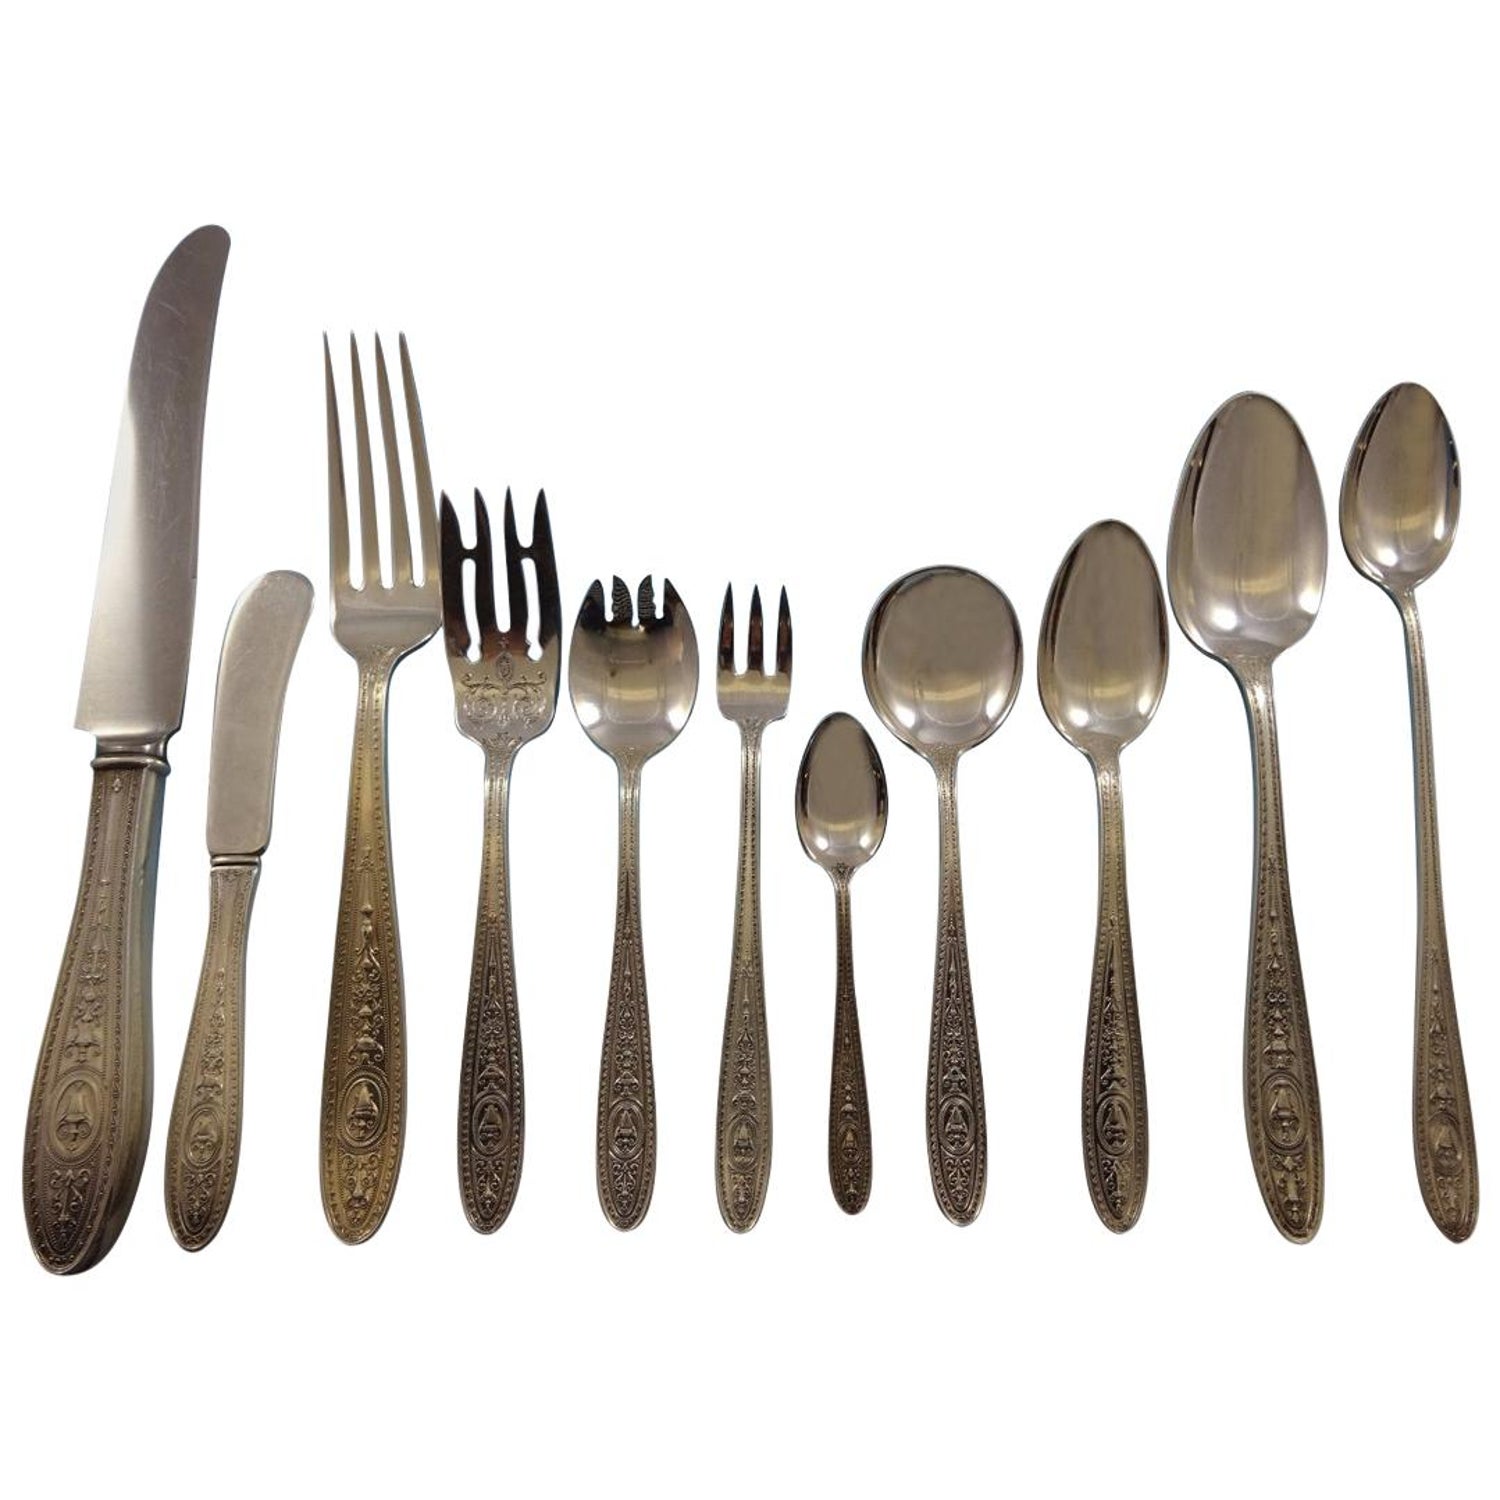 Sold at Auction: Silver Tear Silverware, Steak Knives and more